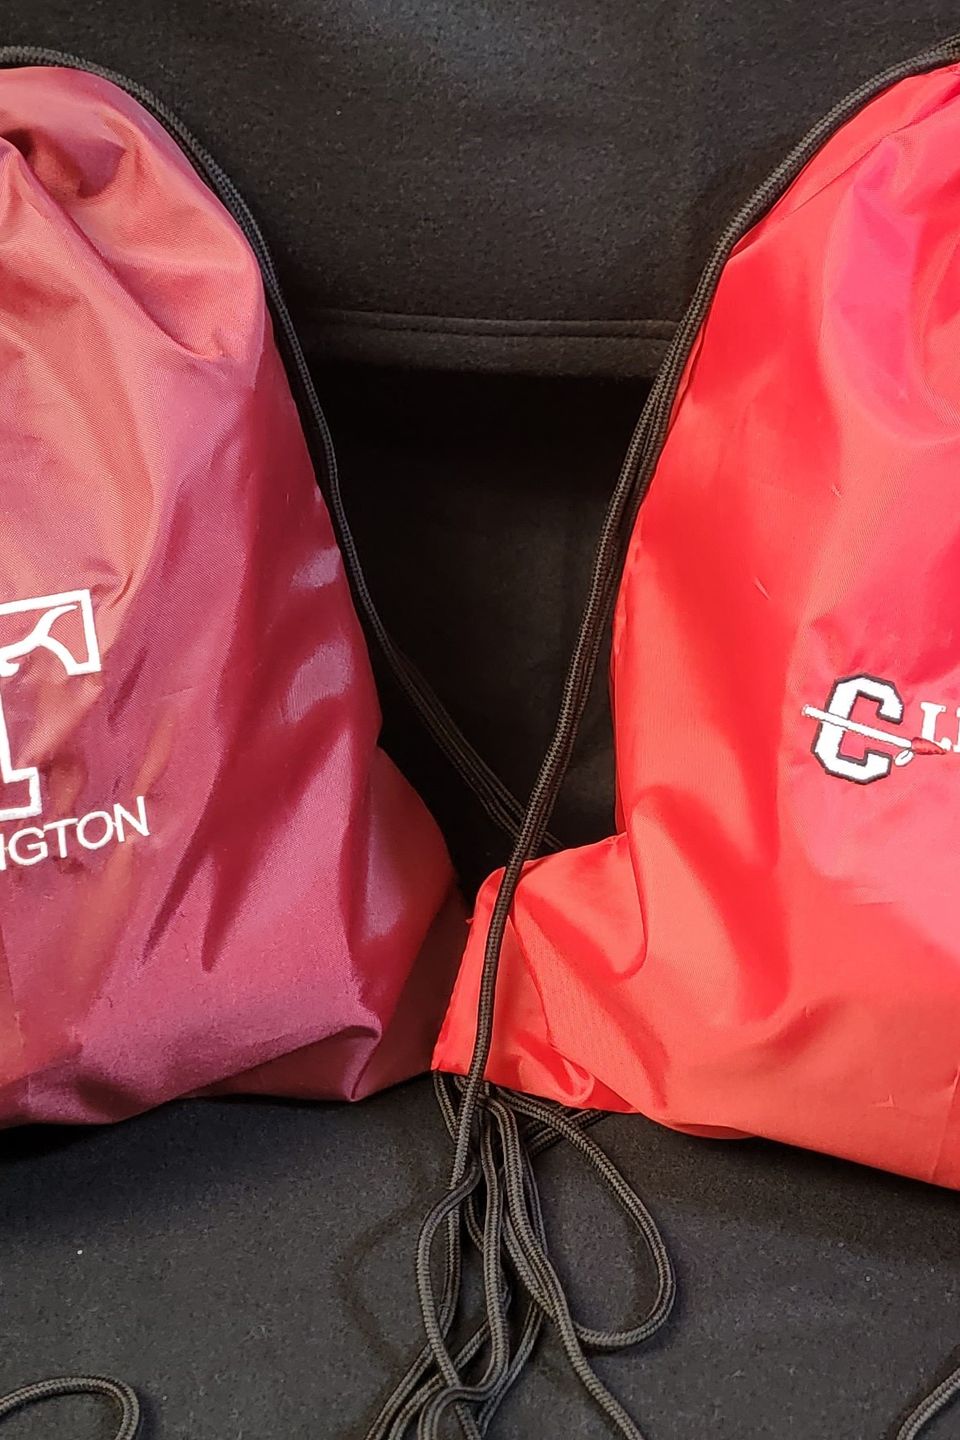 Tarkington and Cleveland HS logos embroidered onto drawstring sports bags